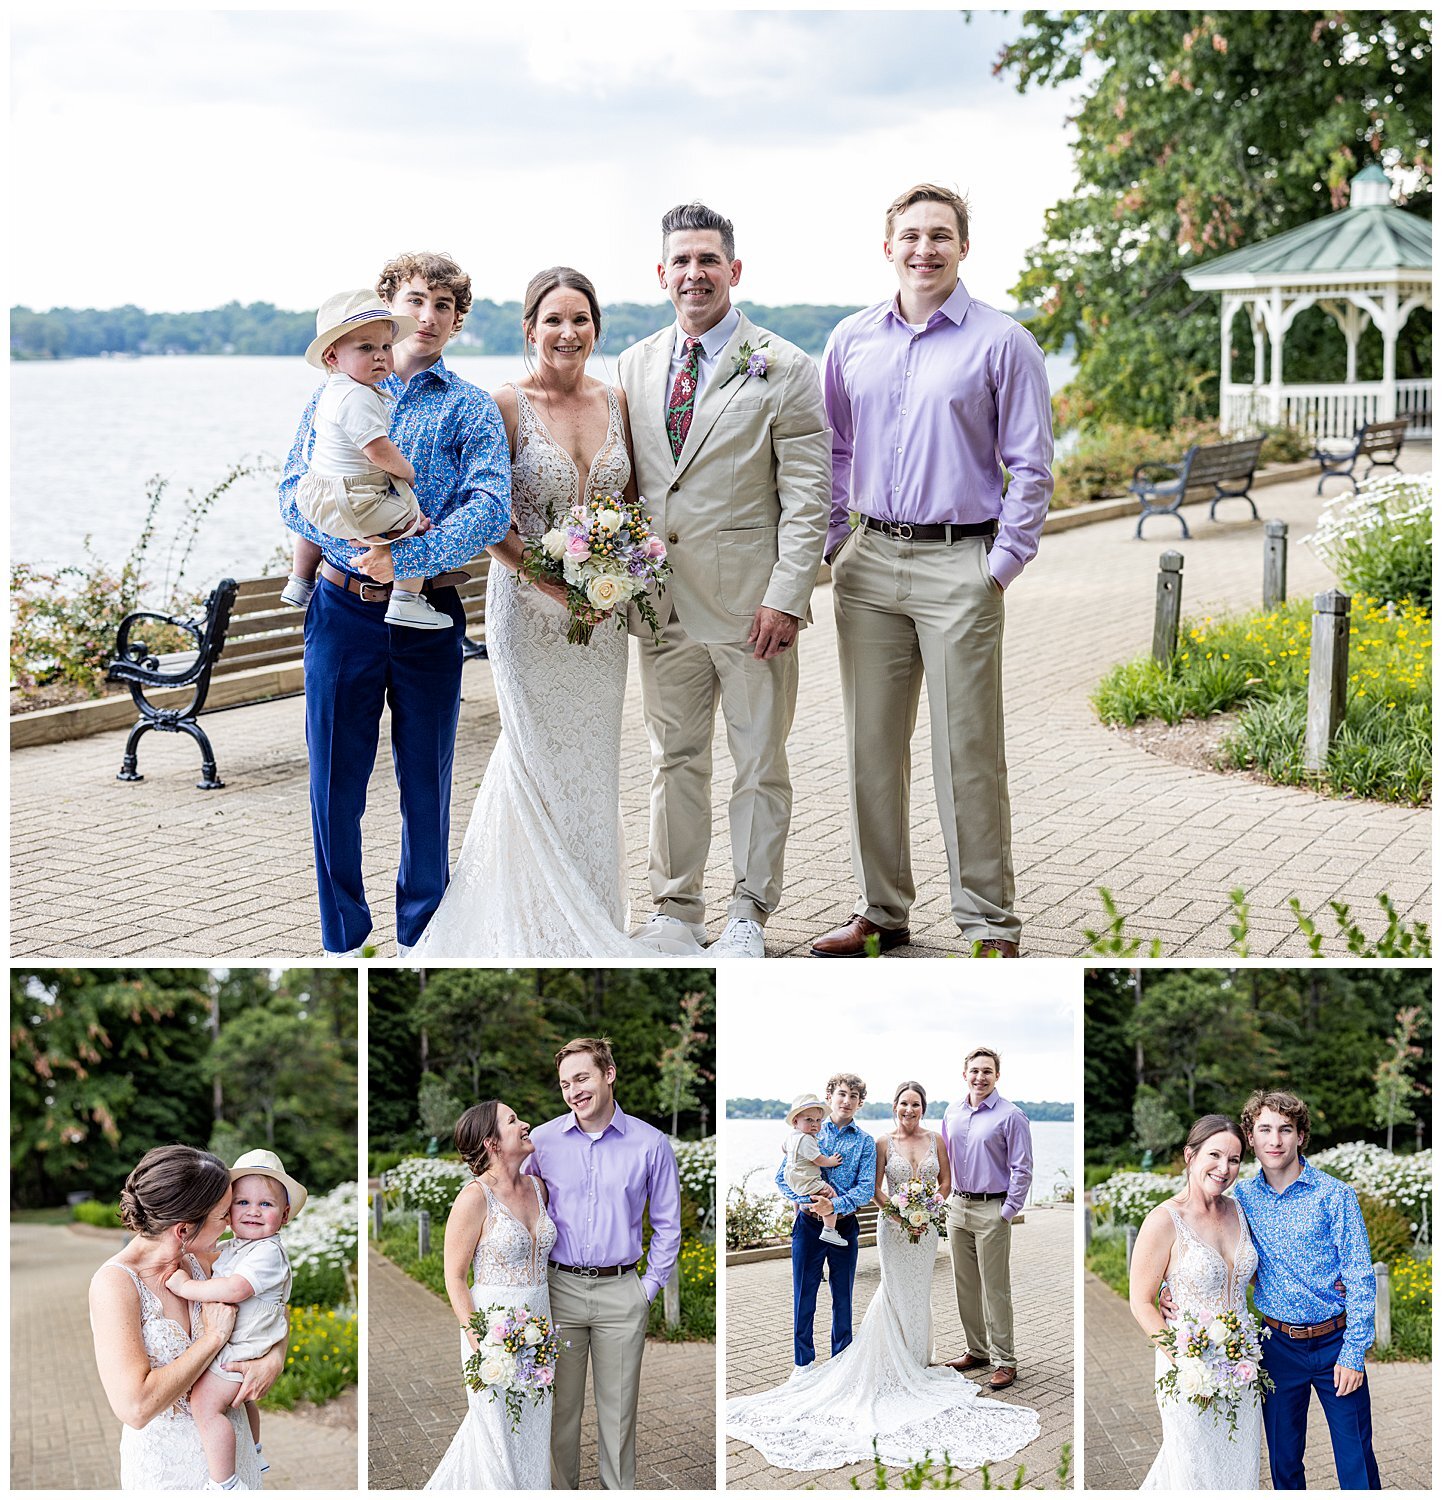 Diana Phillip Quiet Waters Park Annapolis Wedding July 2021 Living Radiant Photography_0013.jpg